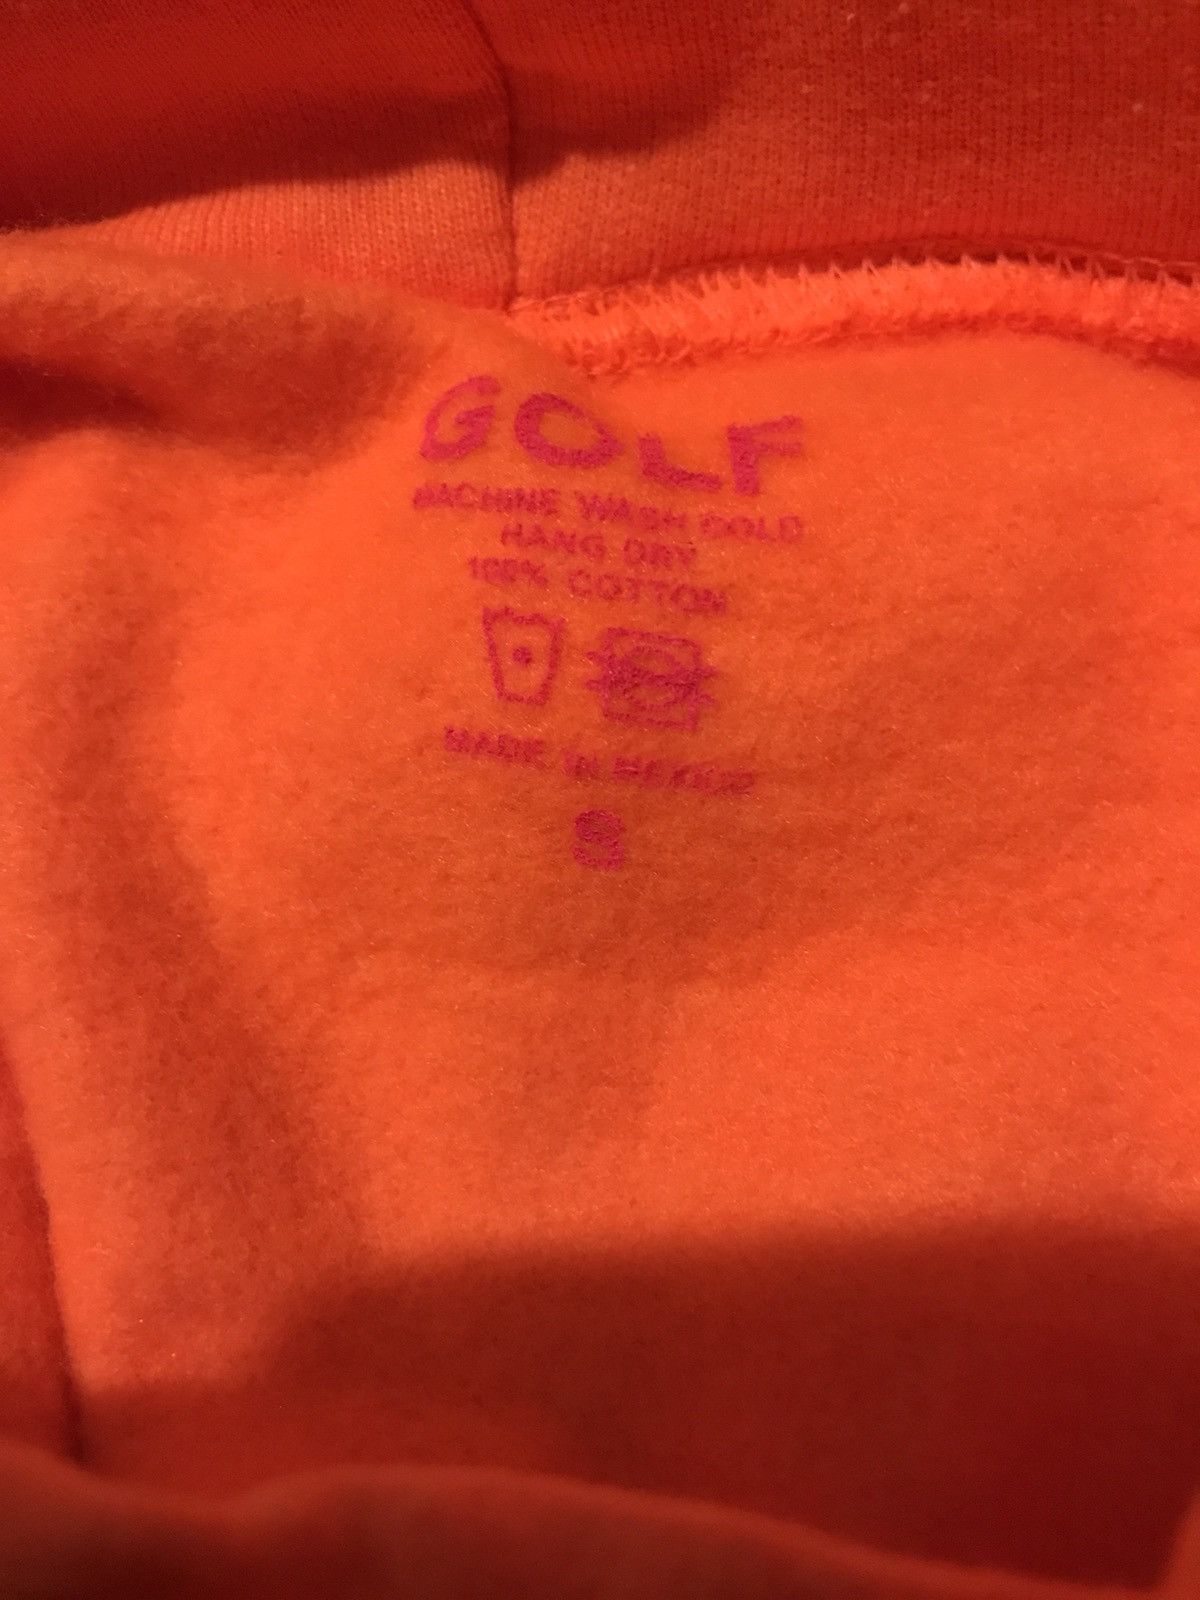 Golf Wang Golf Wang Save The Bees Hoodie Size US S / EU 44-46 / 1 - 3 Preview